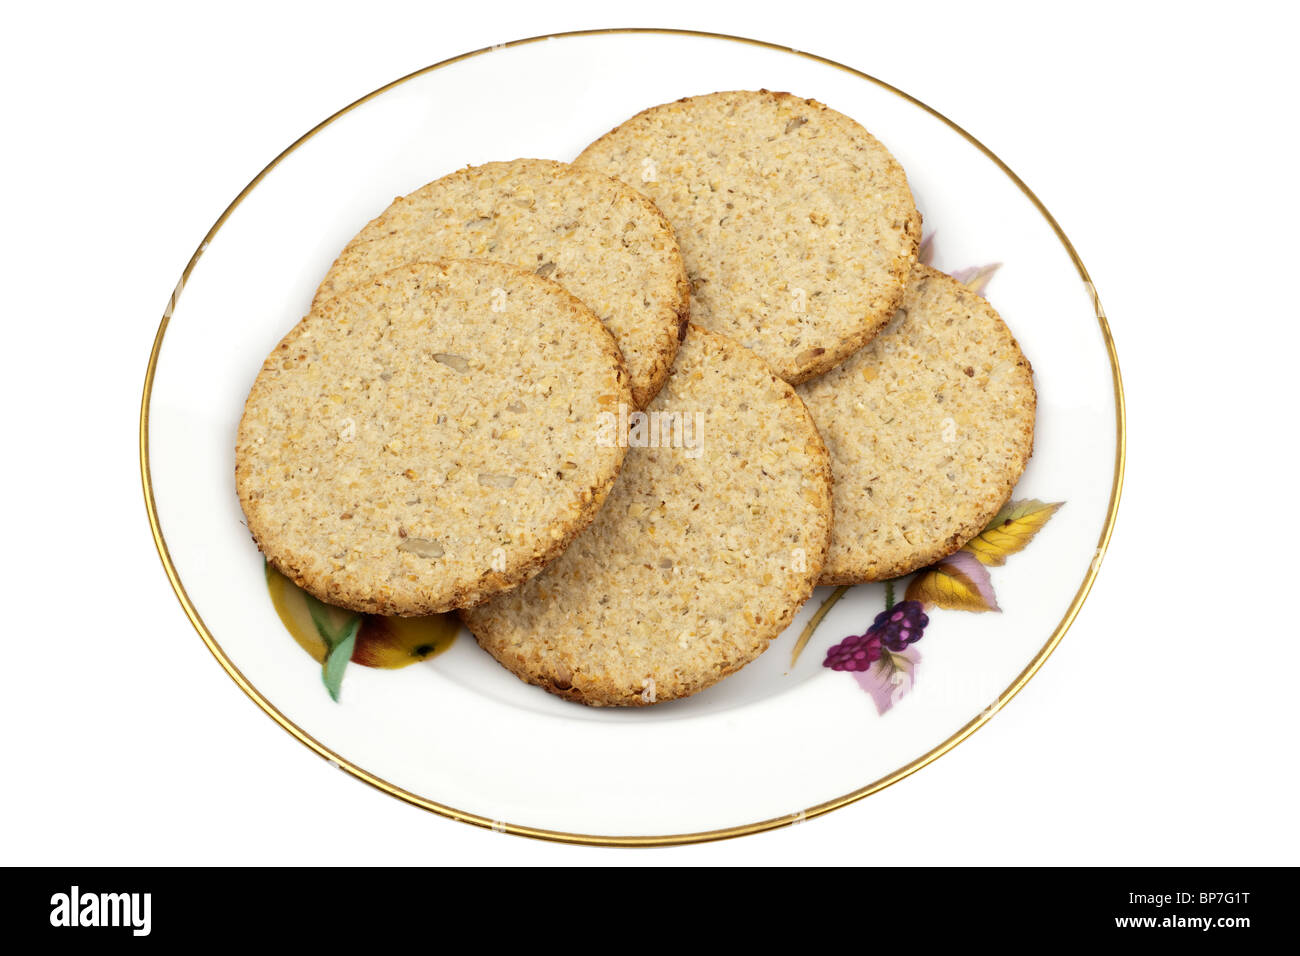 Stack of sunflower and pumpkin seed oatcakes on a white plate Stock Photo